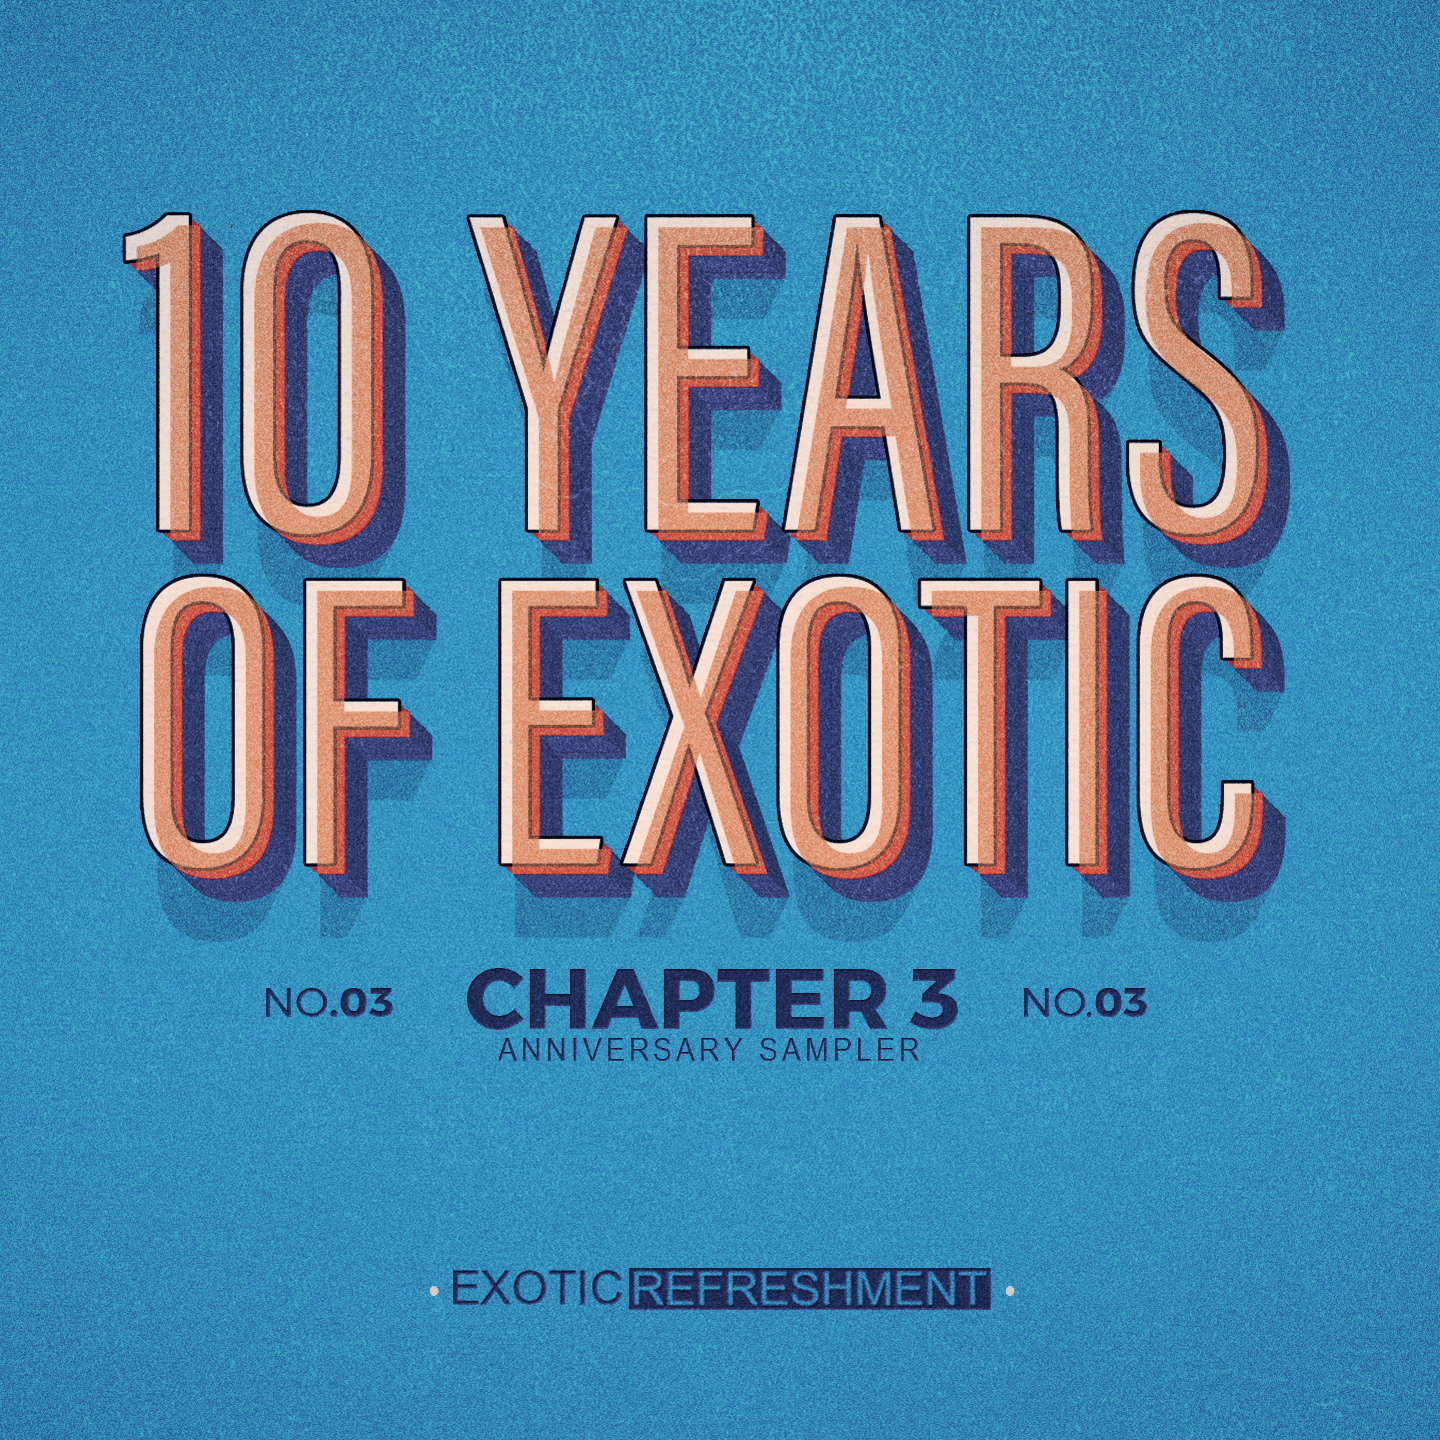 10 Years of Exotic - Chapter 3